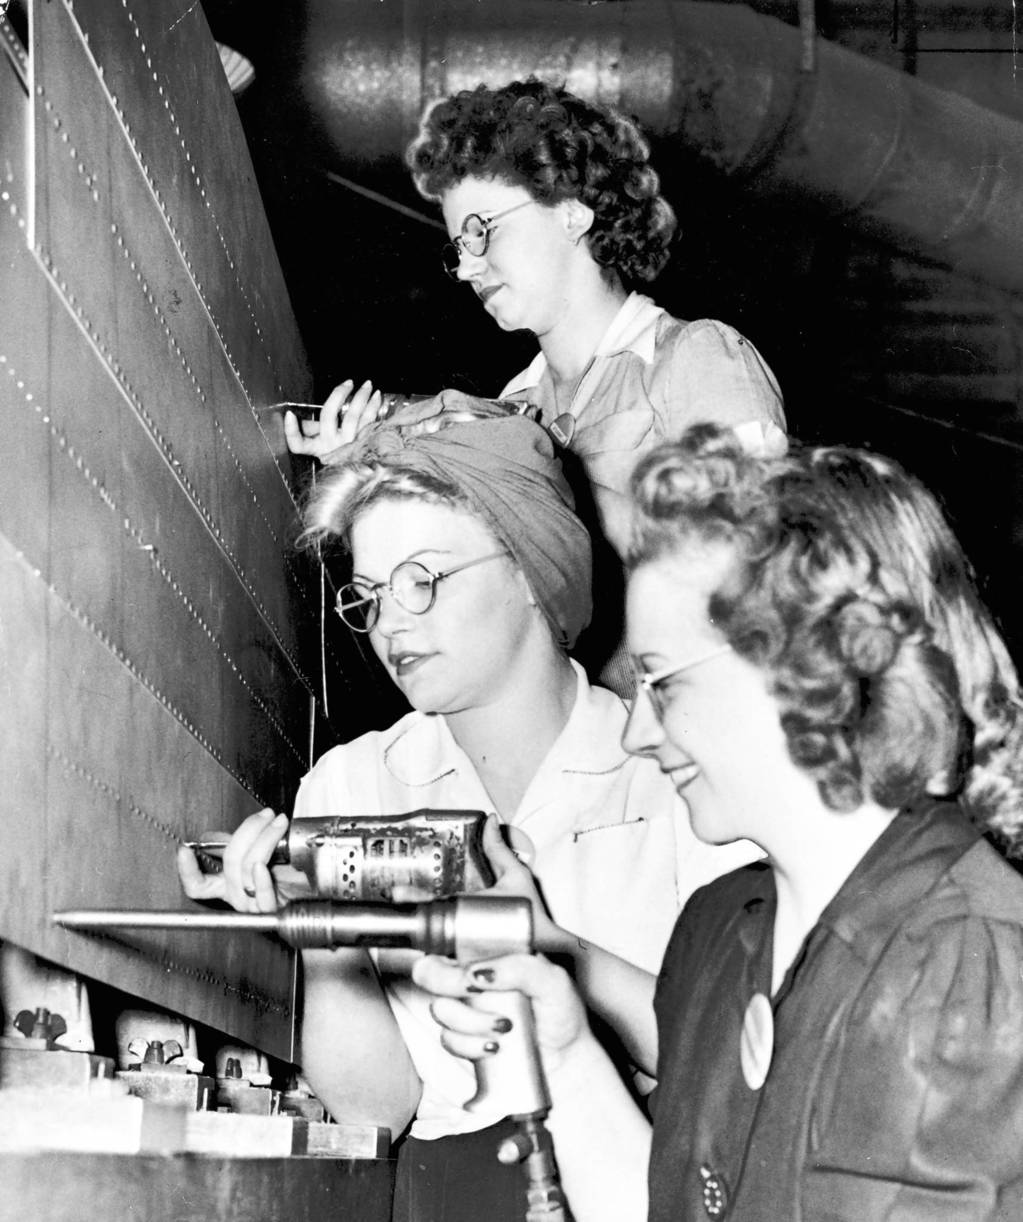 With millions of men inducted into the armed forces during World War II, women flooded into factories to do